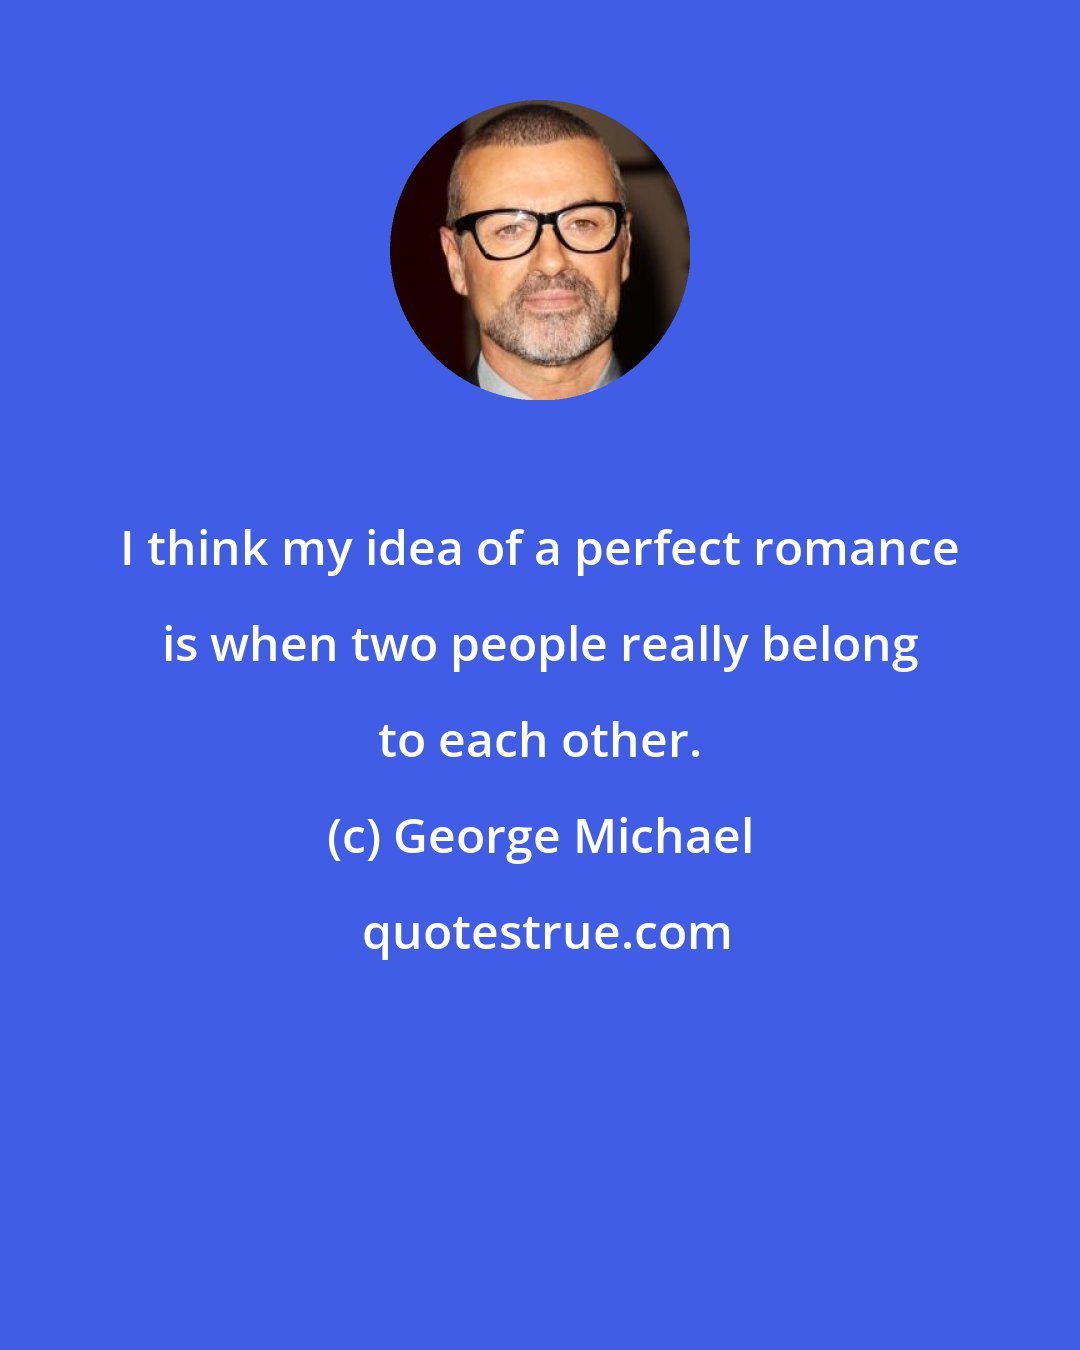 George Michael: I think my idea of a perfect romance is when two people really belong to each other.